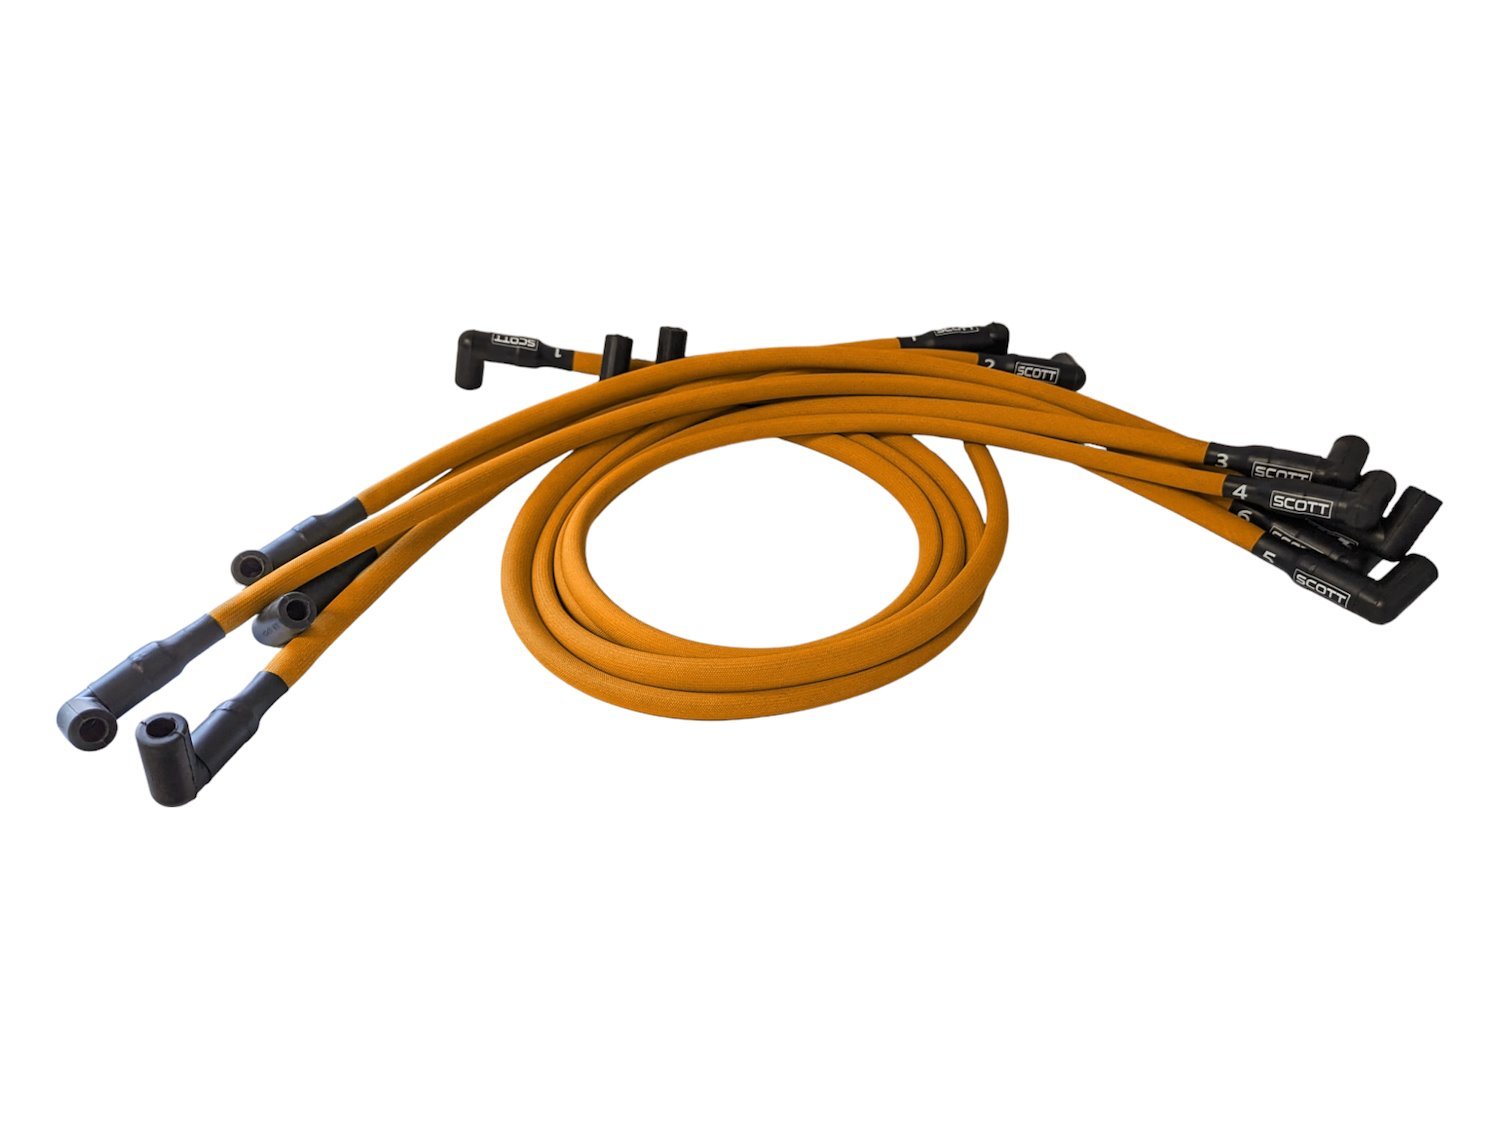 SPW-PS-435-6 High-Performance Fiberglass-Oversleeved Spark Plug Wire Set for Small Block Chevy, Around Front [Orange]